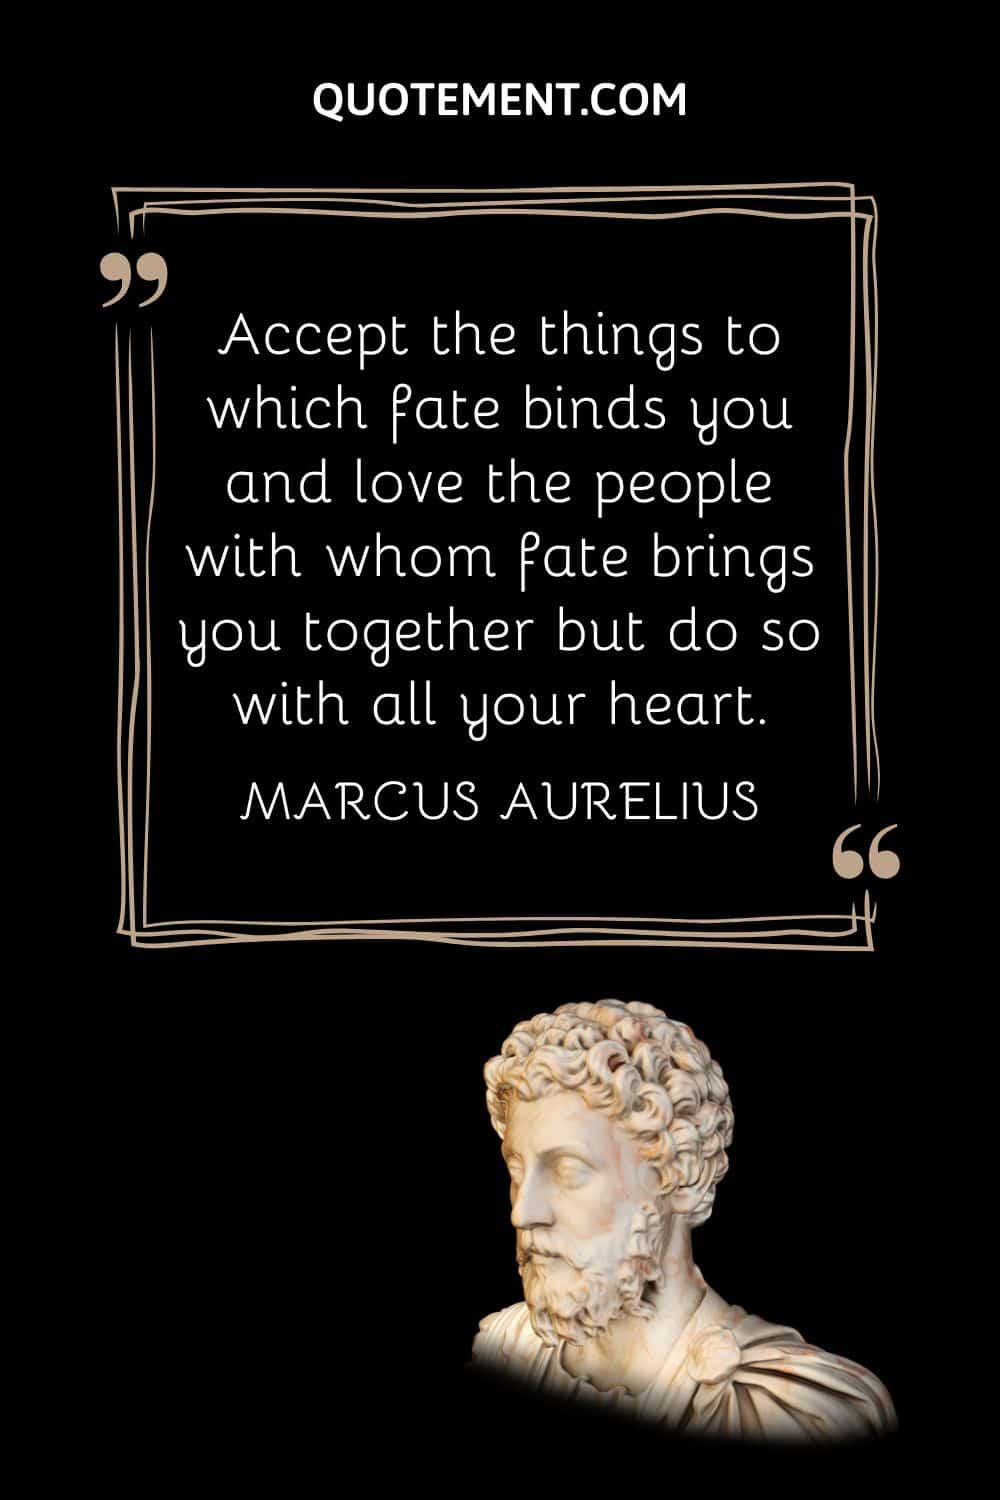 “Accept the things to which fate binds you and love the people with whom fate brings you together but do so with all your heart.” — Marcus Aurelius